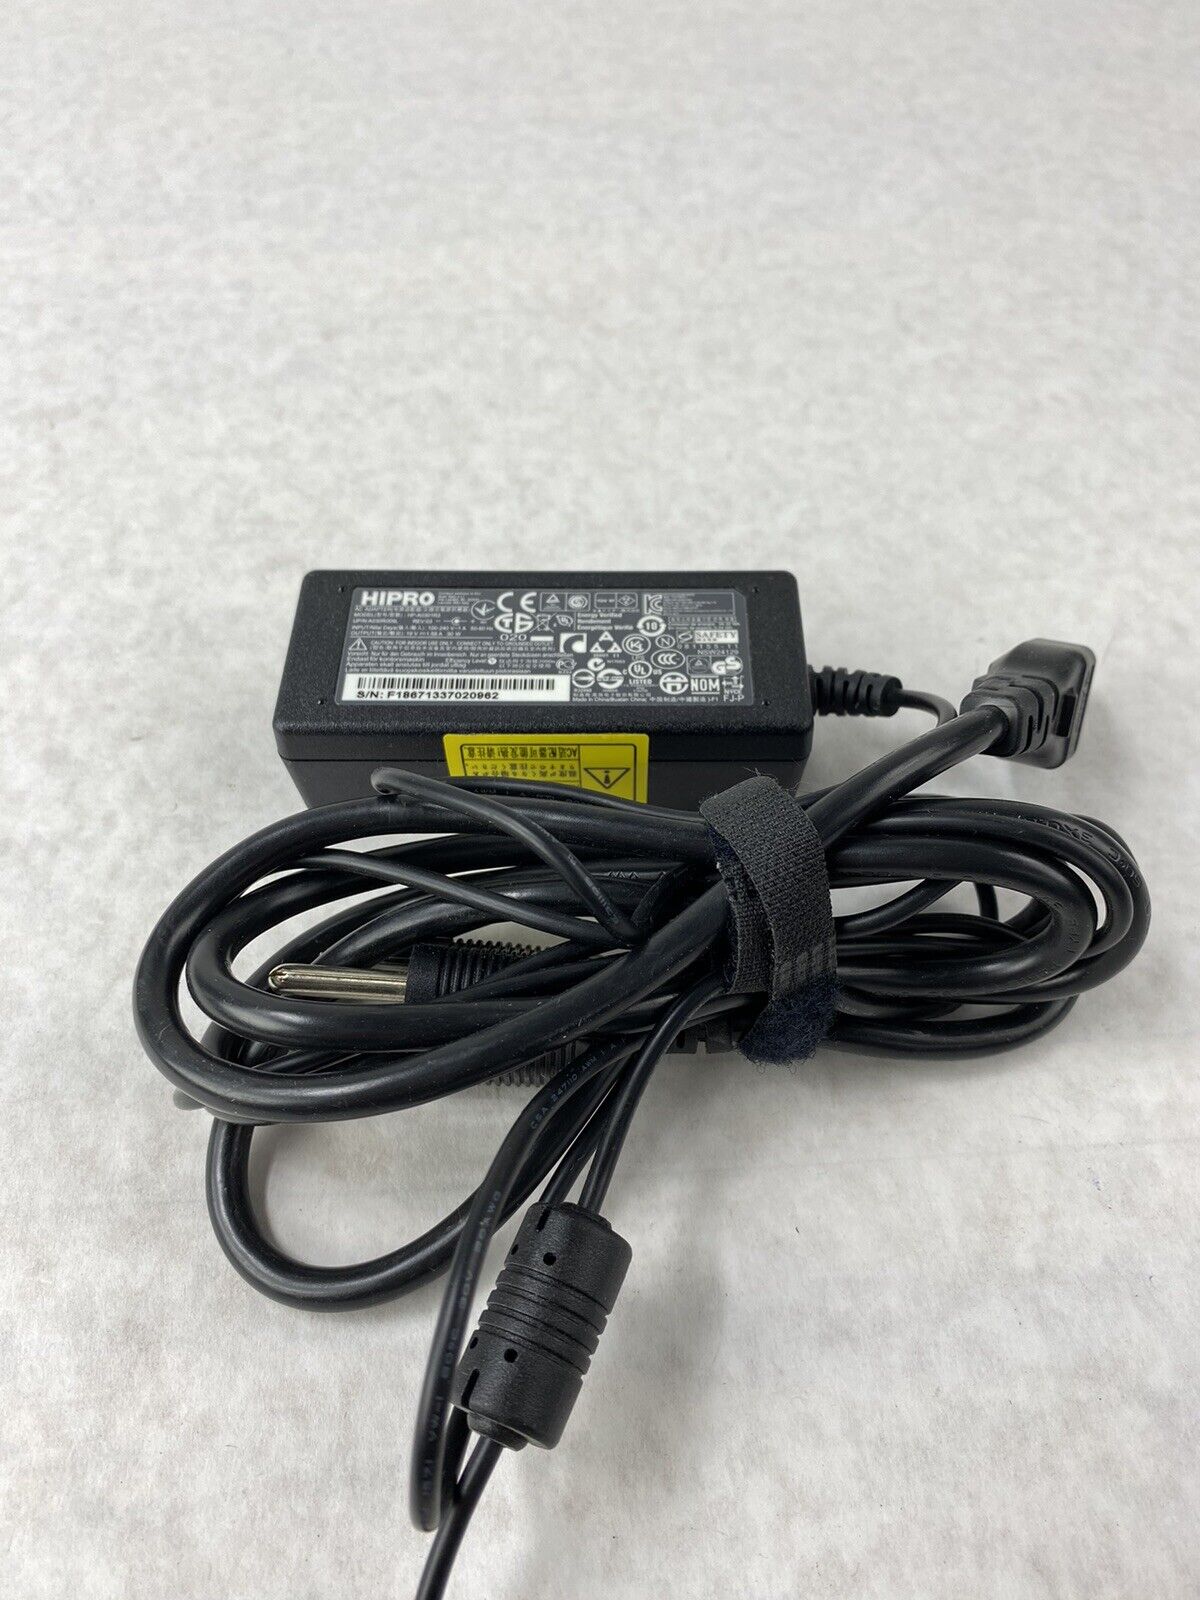 Hipro HP-A0301R3 19V 1.58A AC Adapter